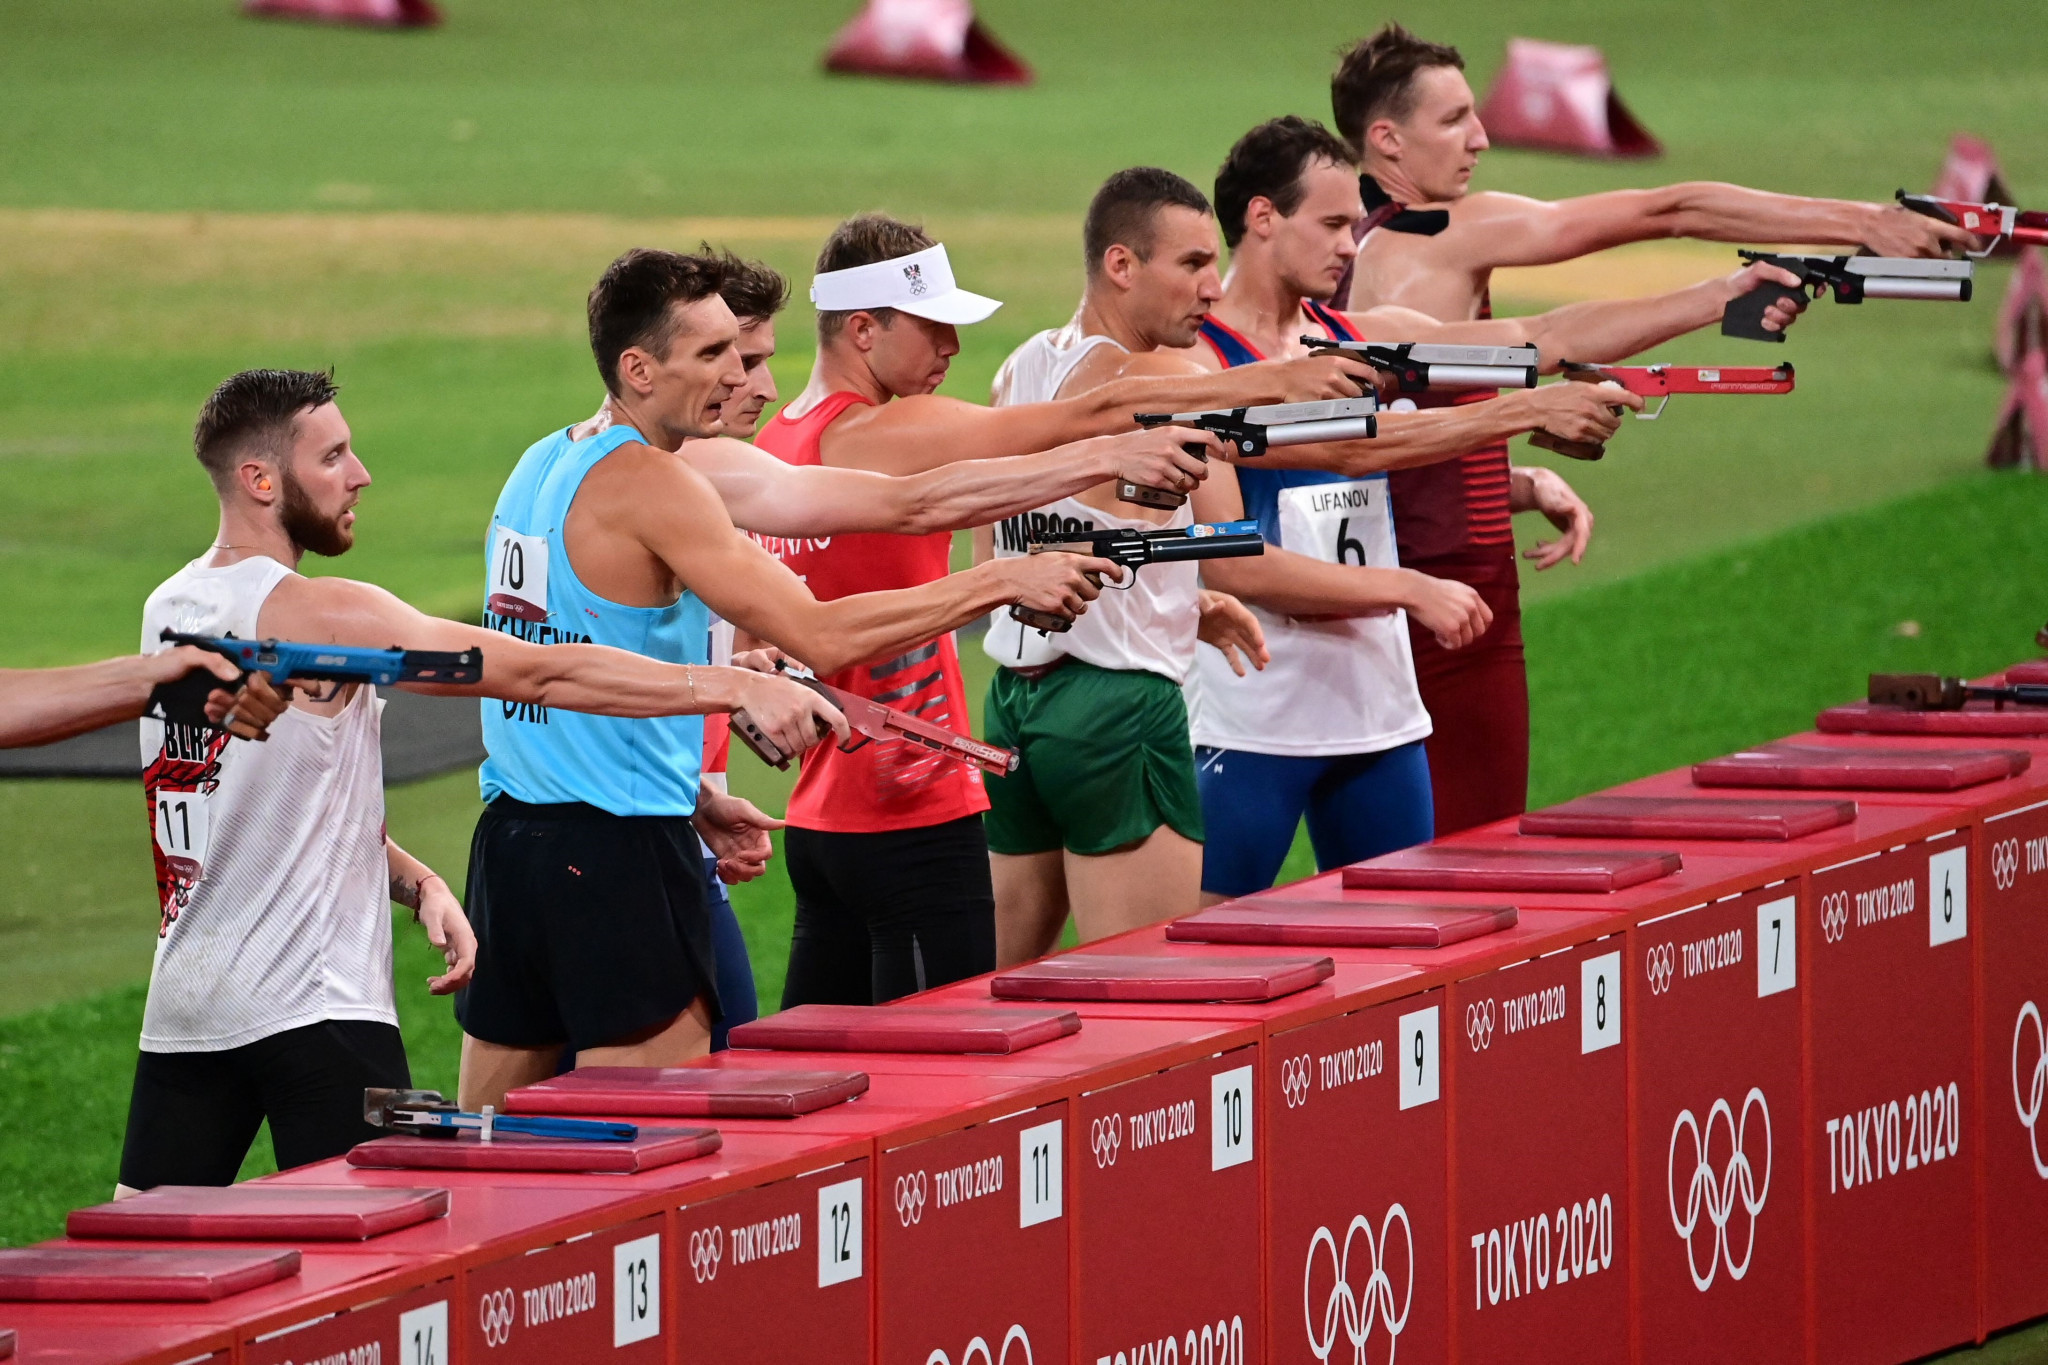 An online survey has found that the majority of pentathletes believe it is "unlikely or very unlikely" that modern pentathlon will be included at Los Angeles 2028 ©Getty Images